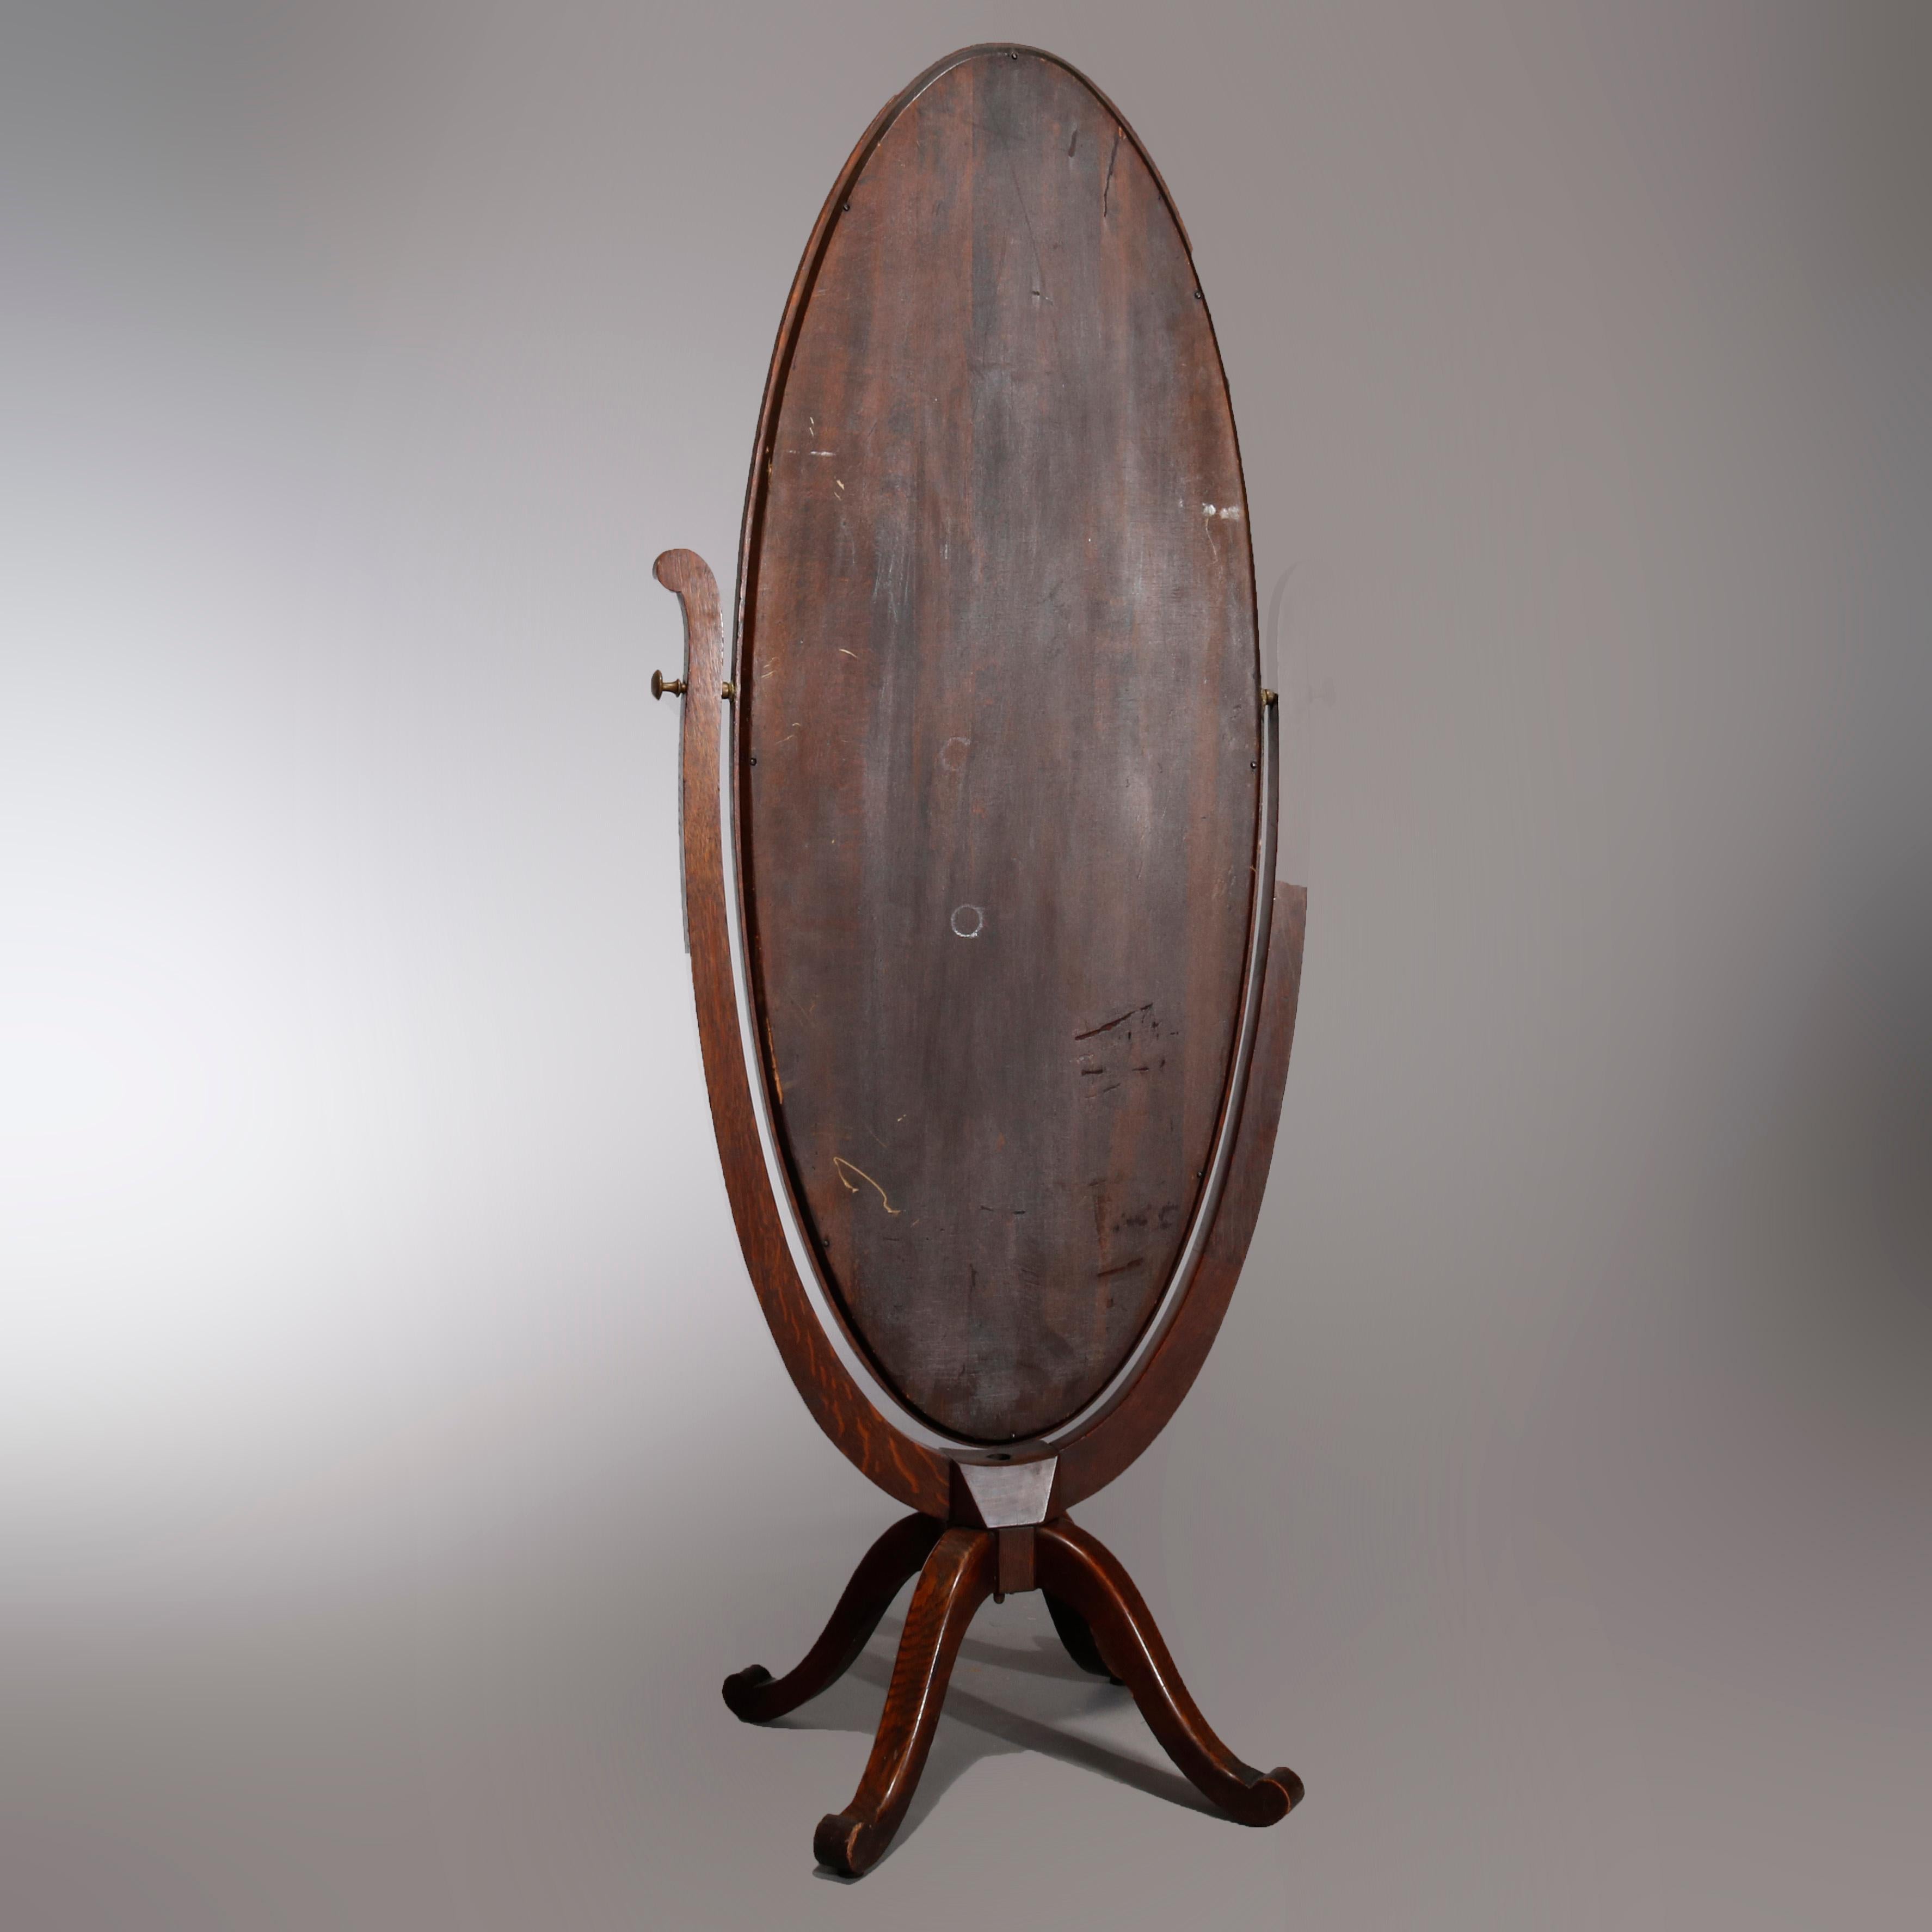 An antique cheval dressing mirror in the manner of R.J. Horner offers oak frame with oval mirror raised on quadruped base with cabriole legs, circa 1900.

Measures: 70.5